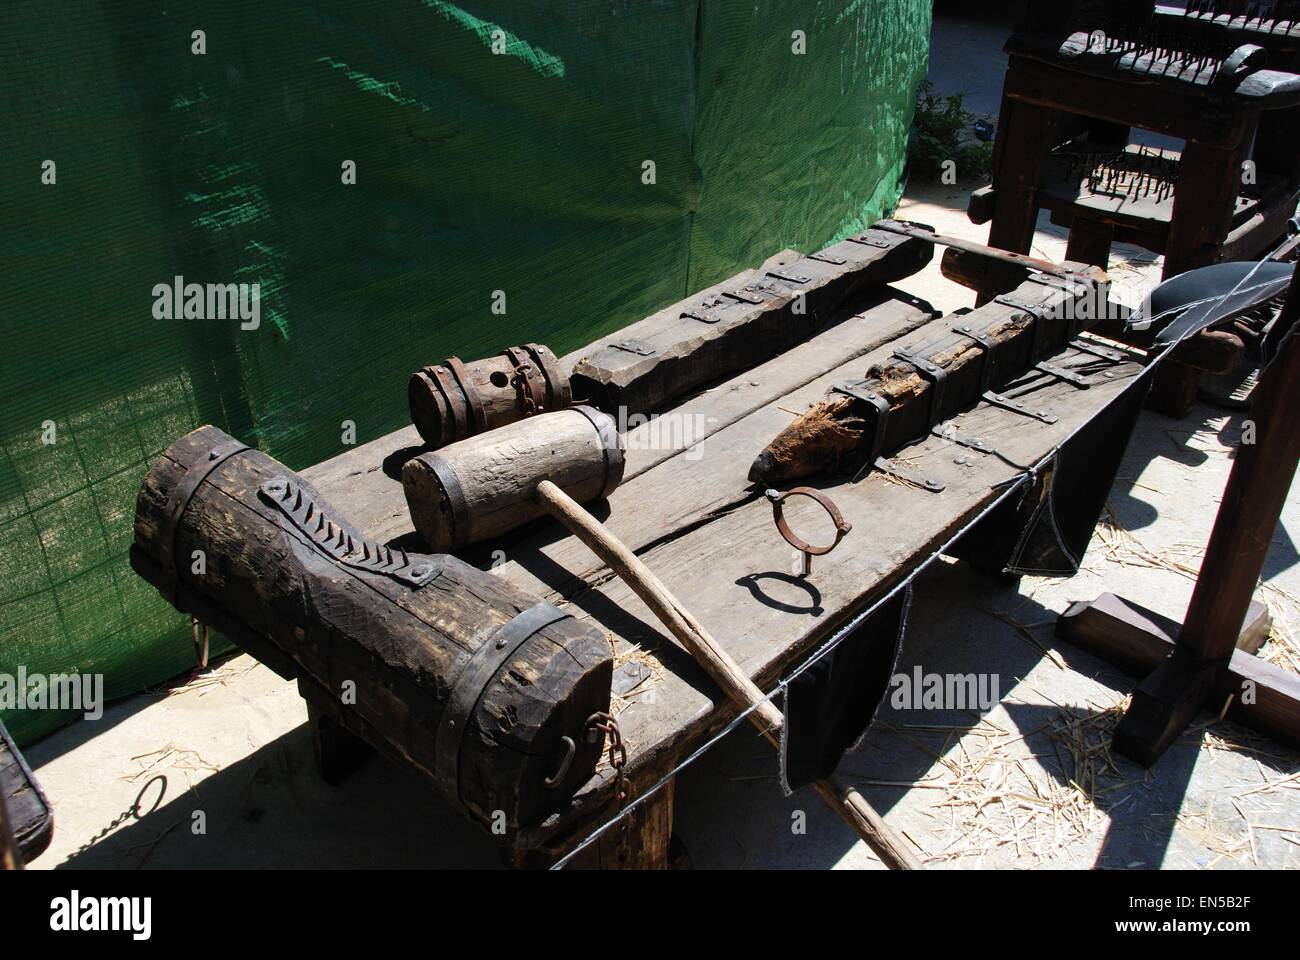 Medieval instruments of torture at the Medieval market, Barbate, Cadiz Province, Andalusia, Spain, Western Europe. Stock Photo